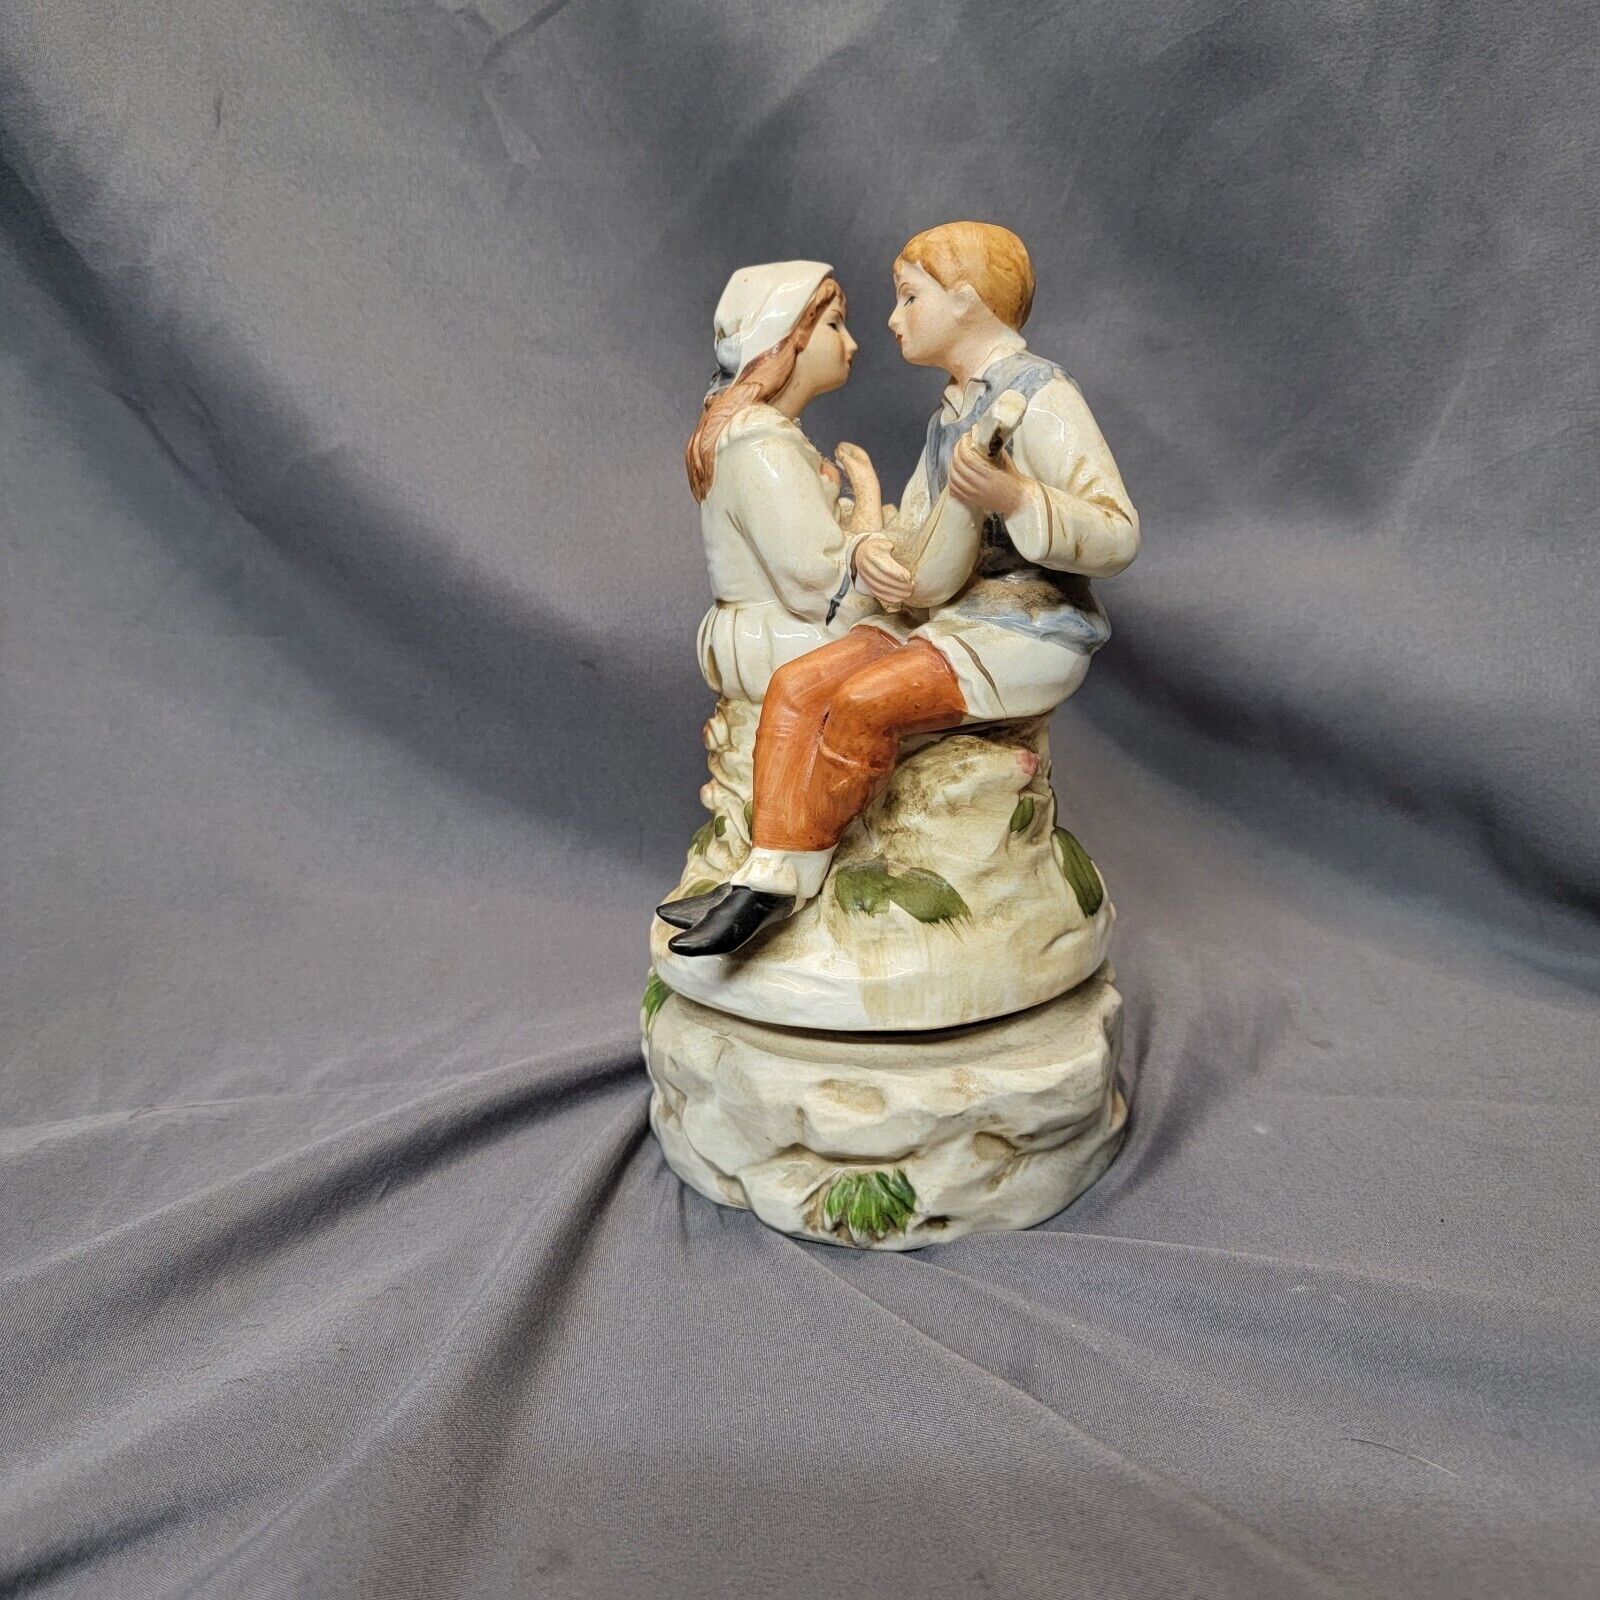 Vintage Boy With Mandolin And Girl Musical Figurine